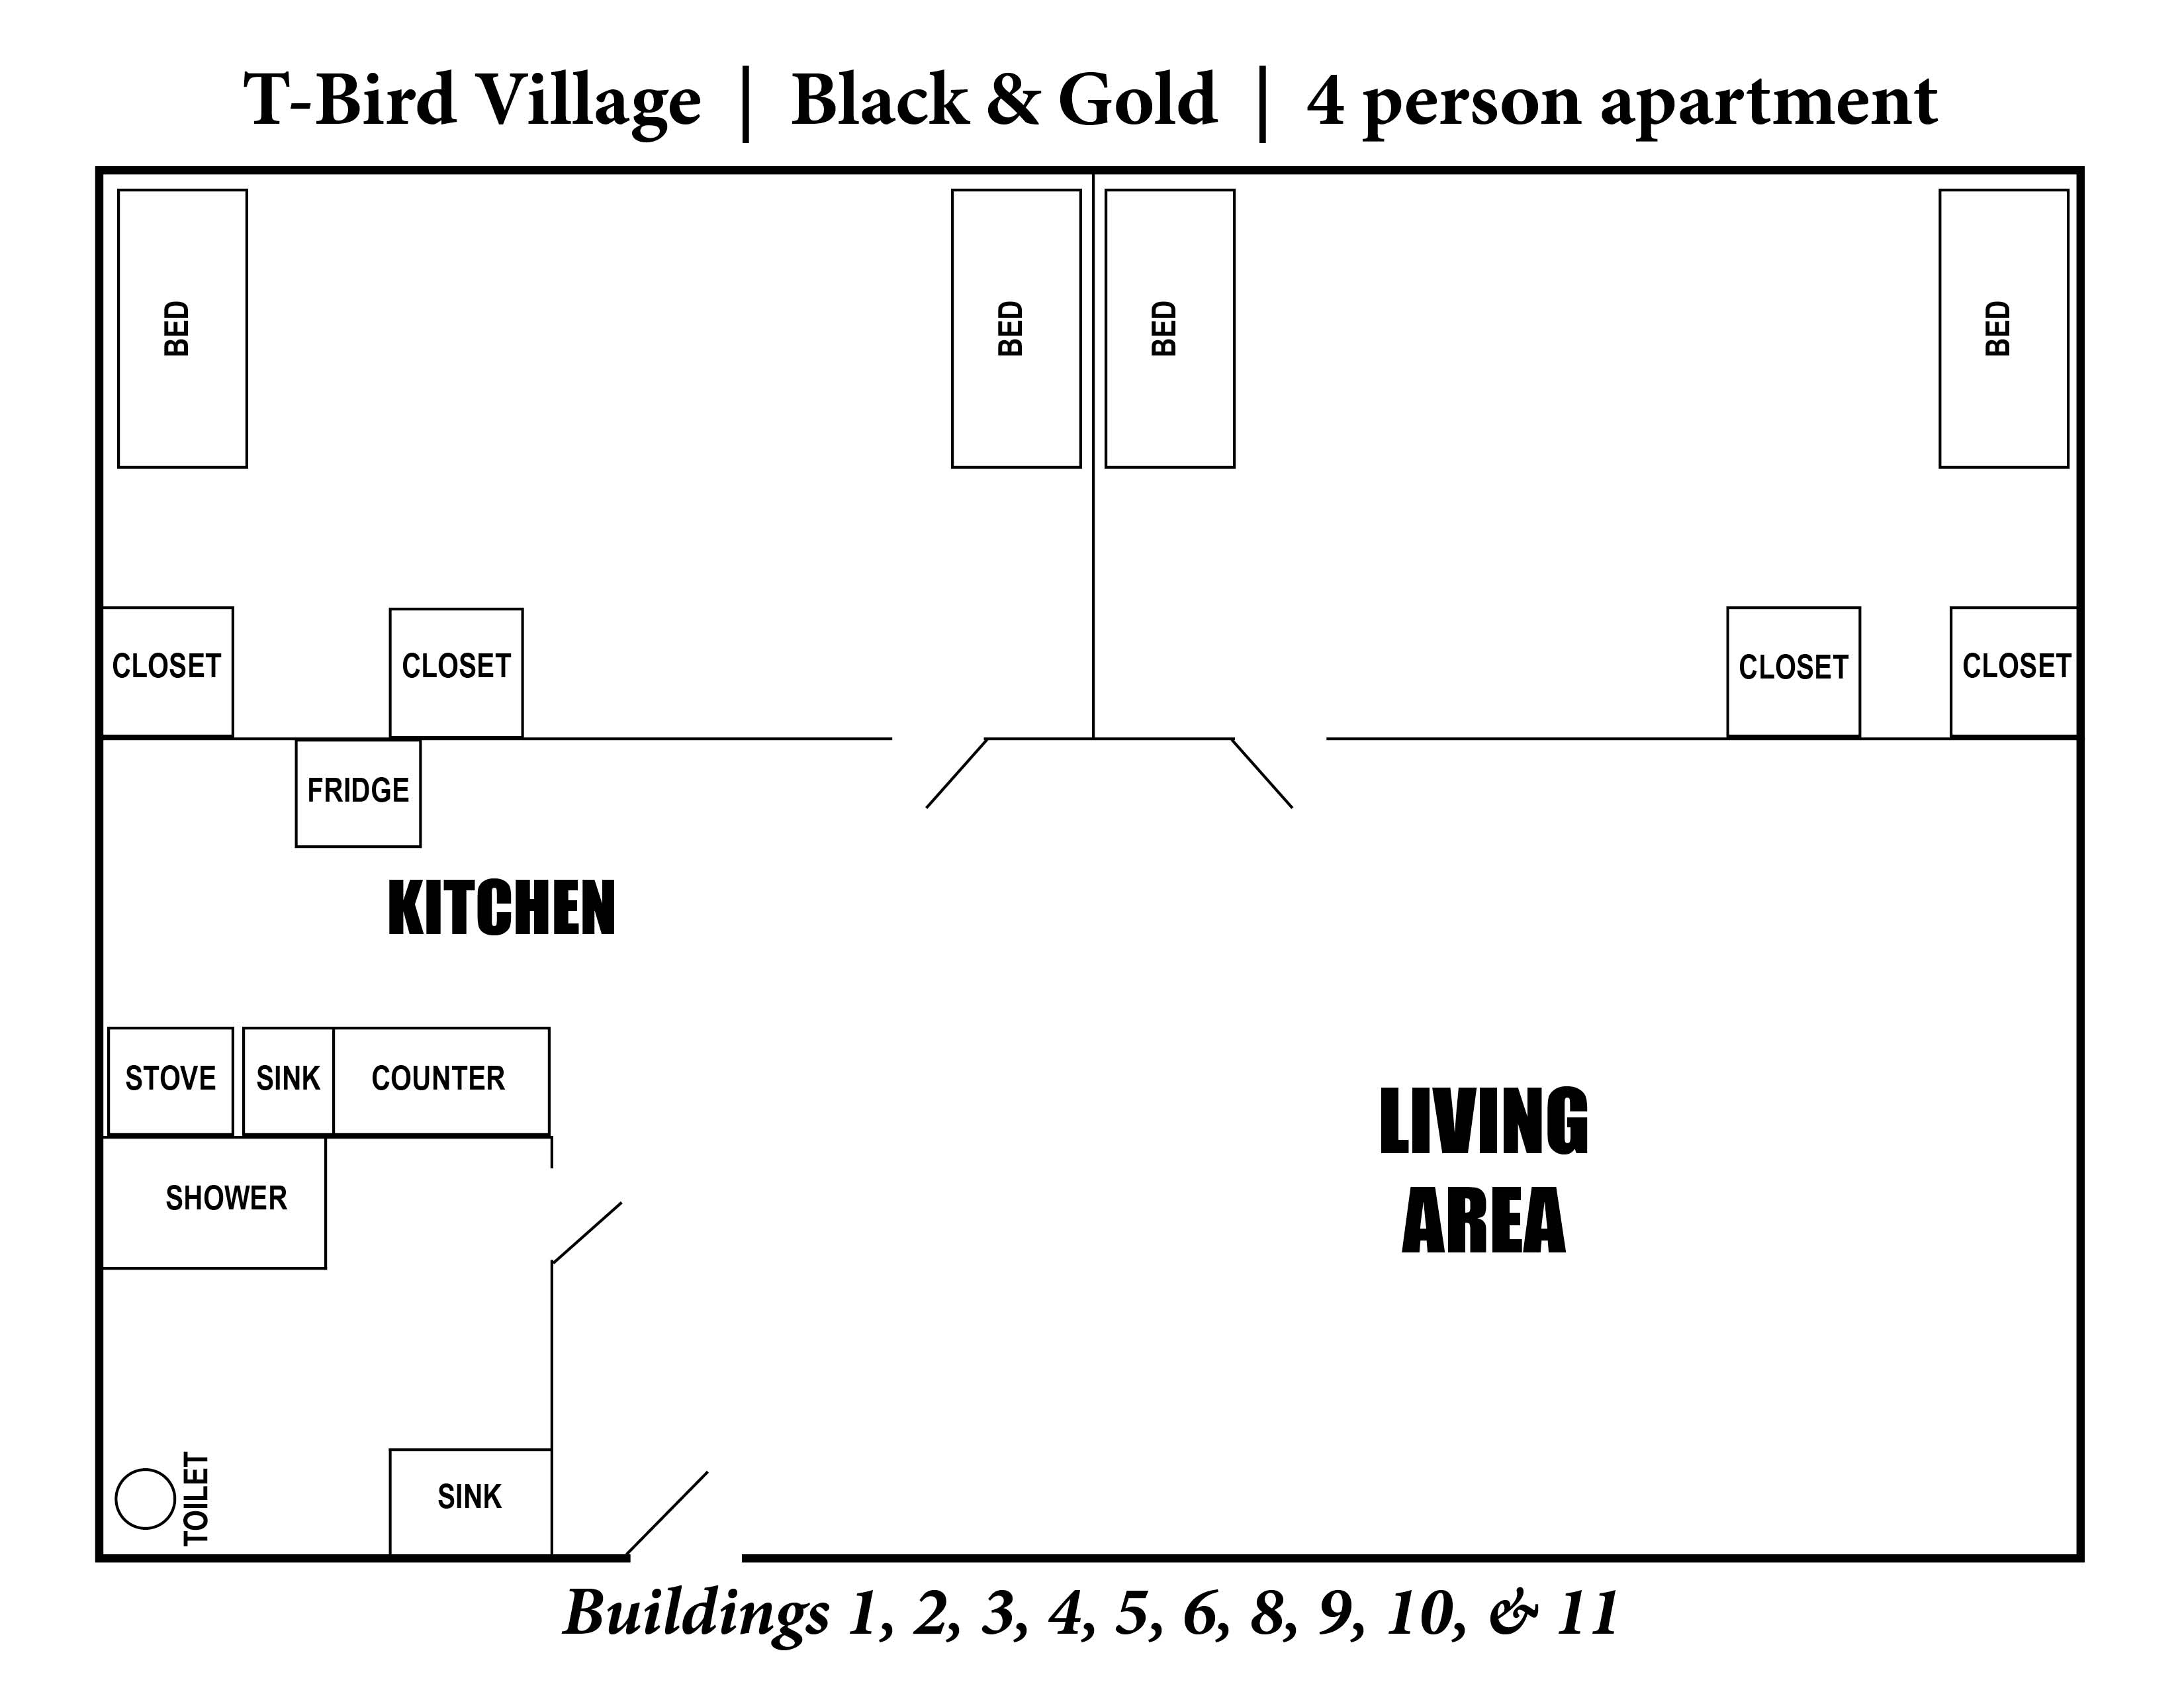 A photo of the layout of T-Bird Village 4 person apartment.